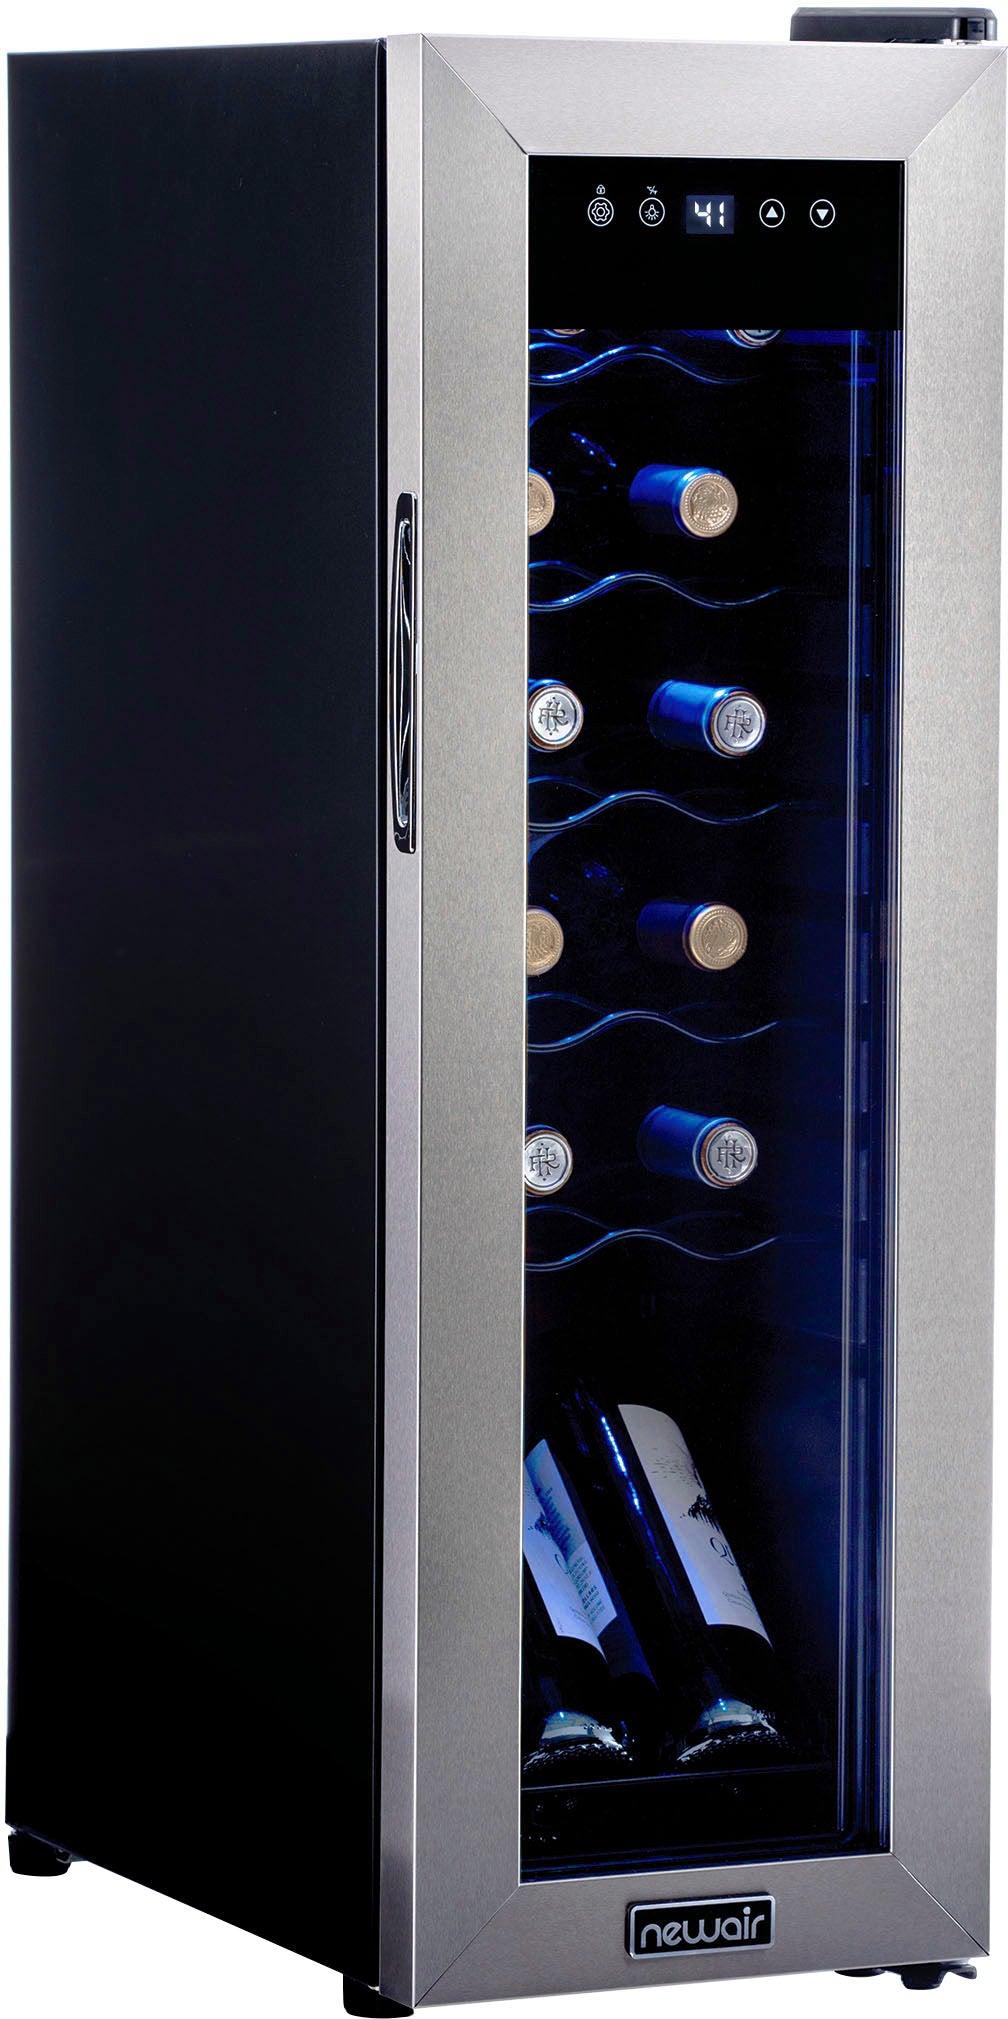 NewAir - 12-Bottle Wine Cooler with Compressor Cooling - Stainless steel_0